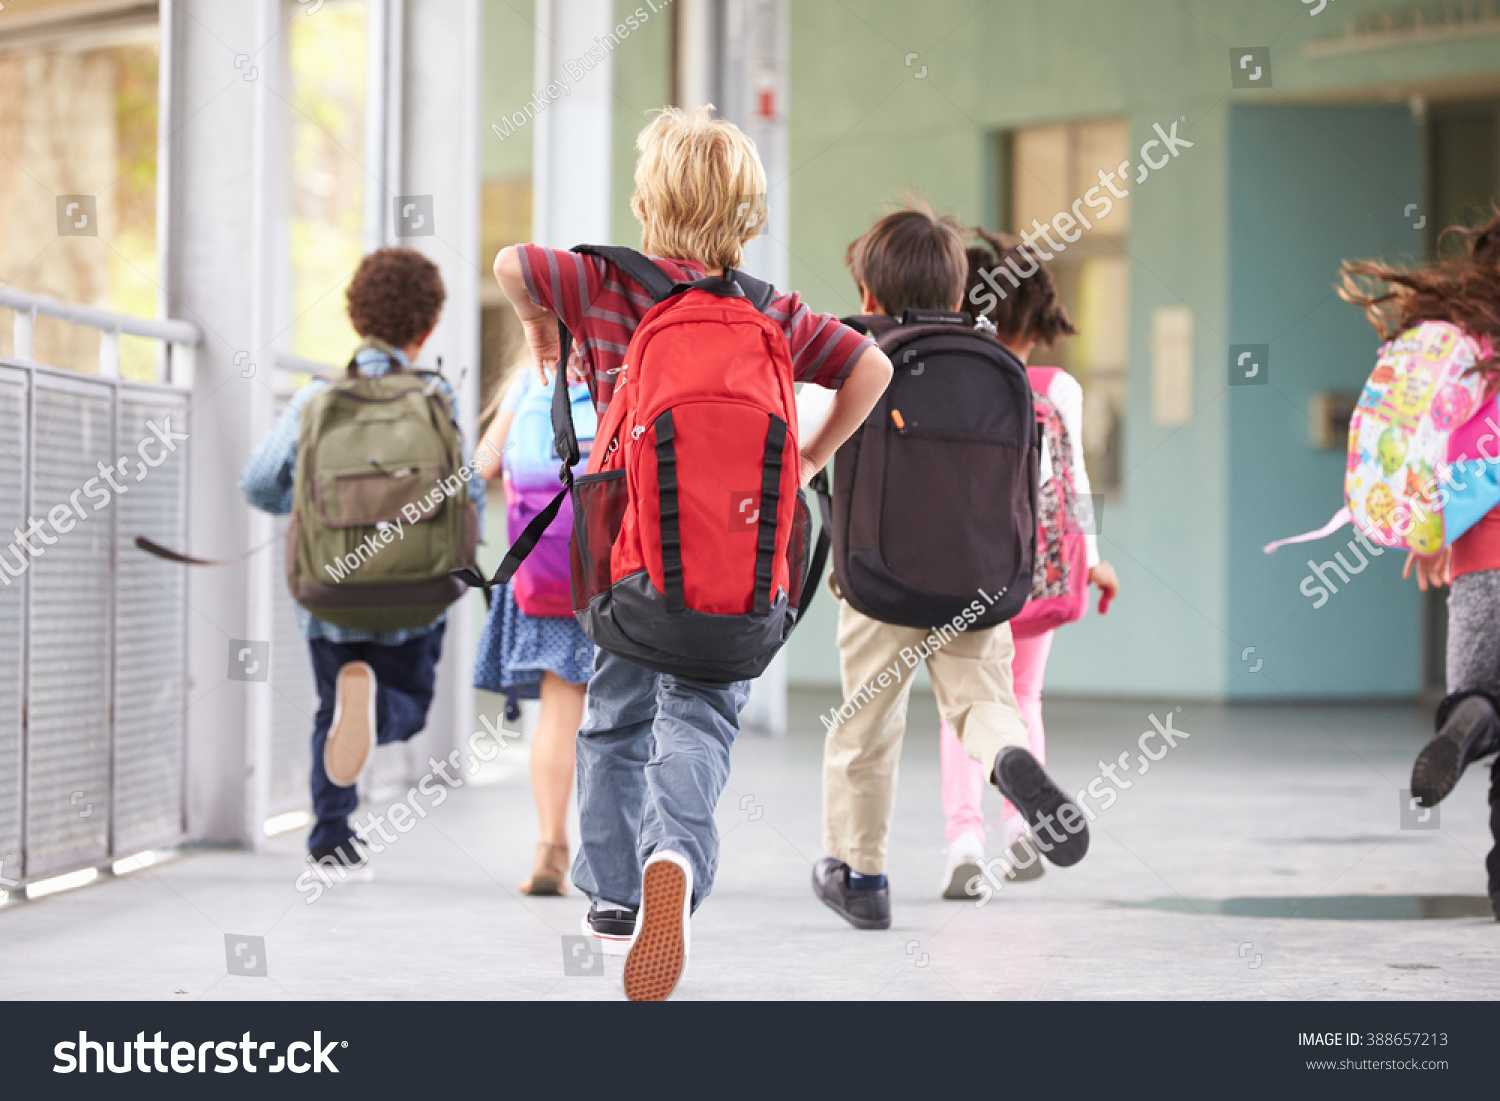 Group of elementary school kids running at school, back view #388657213